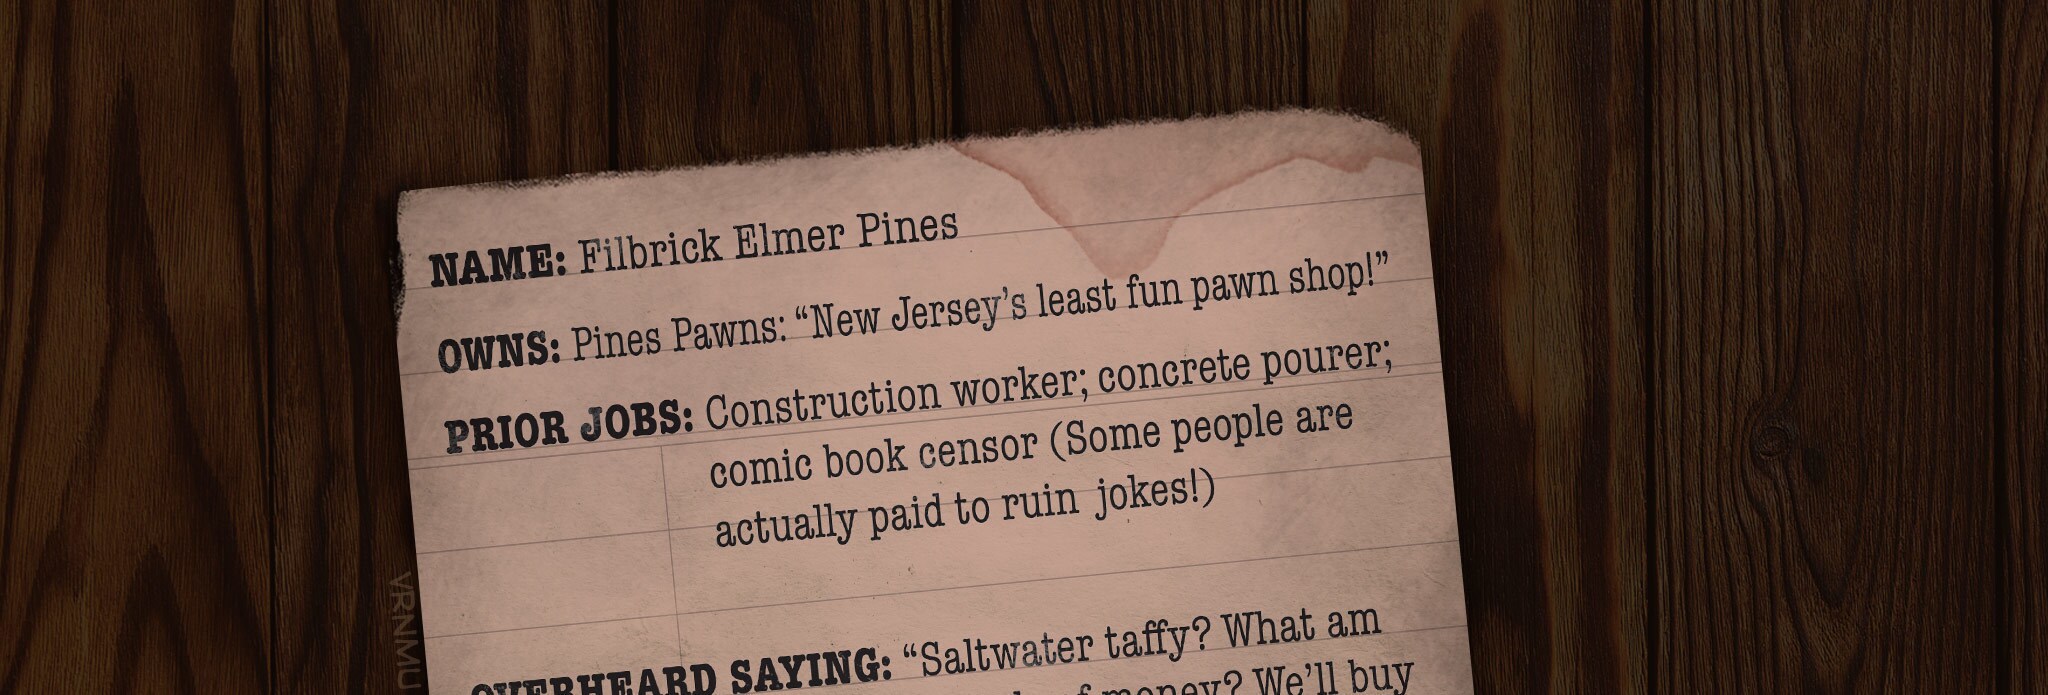 NAME: Filbrick Elmer Pines OWNS: Pines Pawns: “New Jersey’s least fun pawn shop!” PRIOR JOBS: Construction worker; concrete pourer; comic book censor (Some people are actually paid to ruin jokes!) OVERHEARD SAYING: “Saltwater taffy? What am I, made of money? We’ll buy regular-water taffy in this family!” MARRIED TO: Caryn Romanoff Pines, caring mother and kleptomaniac LIKES: Money; putting steak as a condiment on steak; cowboy movies where everyone dies ORIGINAL FAMILY NAME: The name Pines was reportedly introduced at Ellis Island, but records of the original name have been lost....